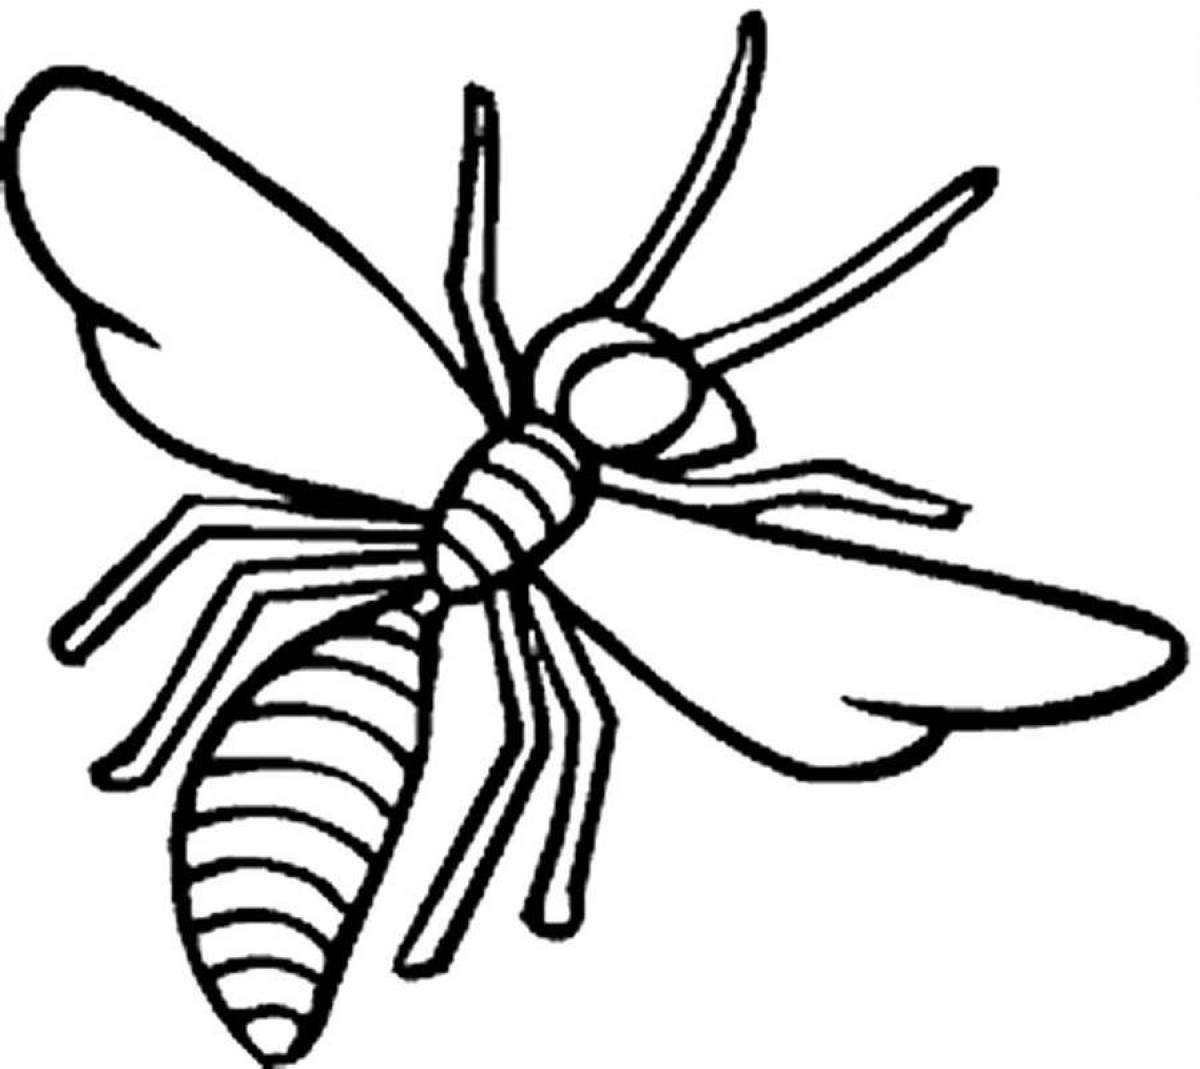 Intriguing wasp coloring page